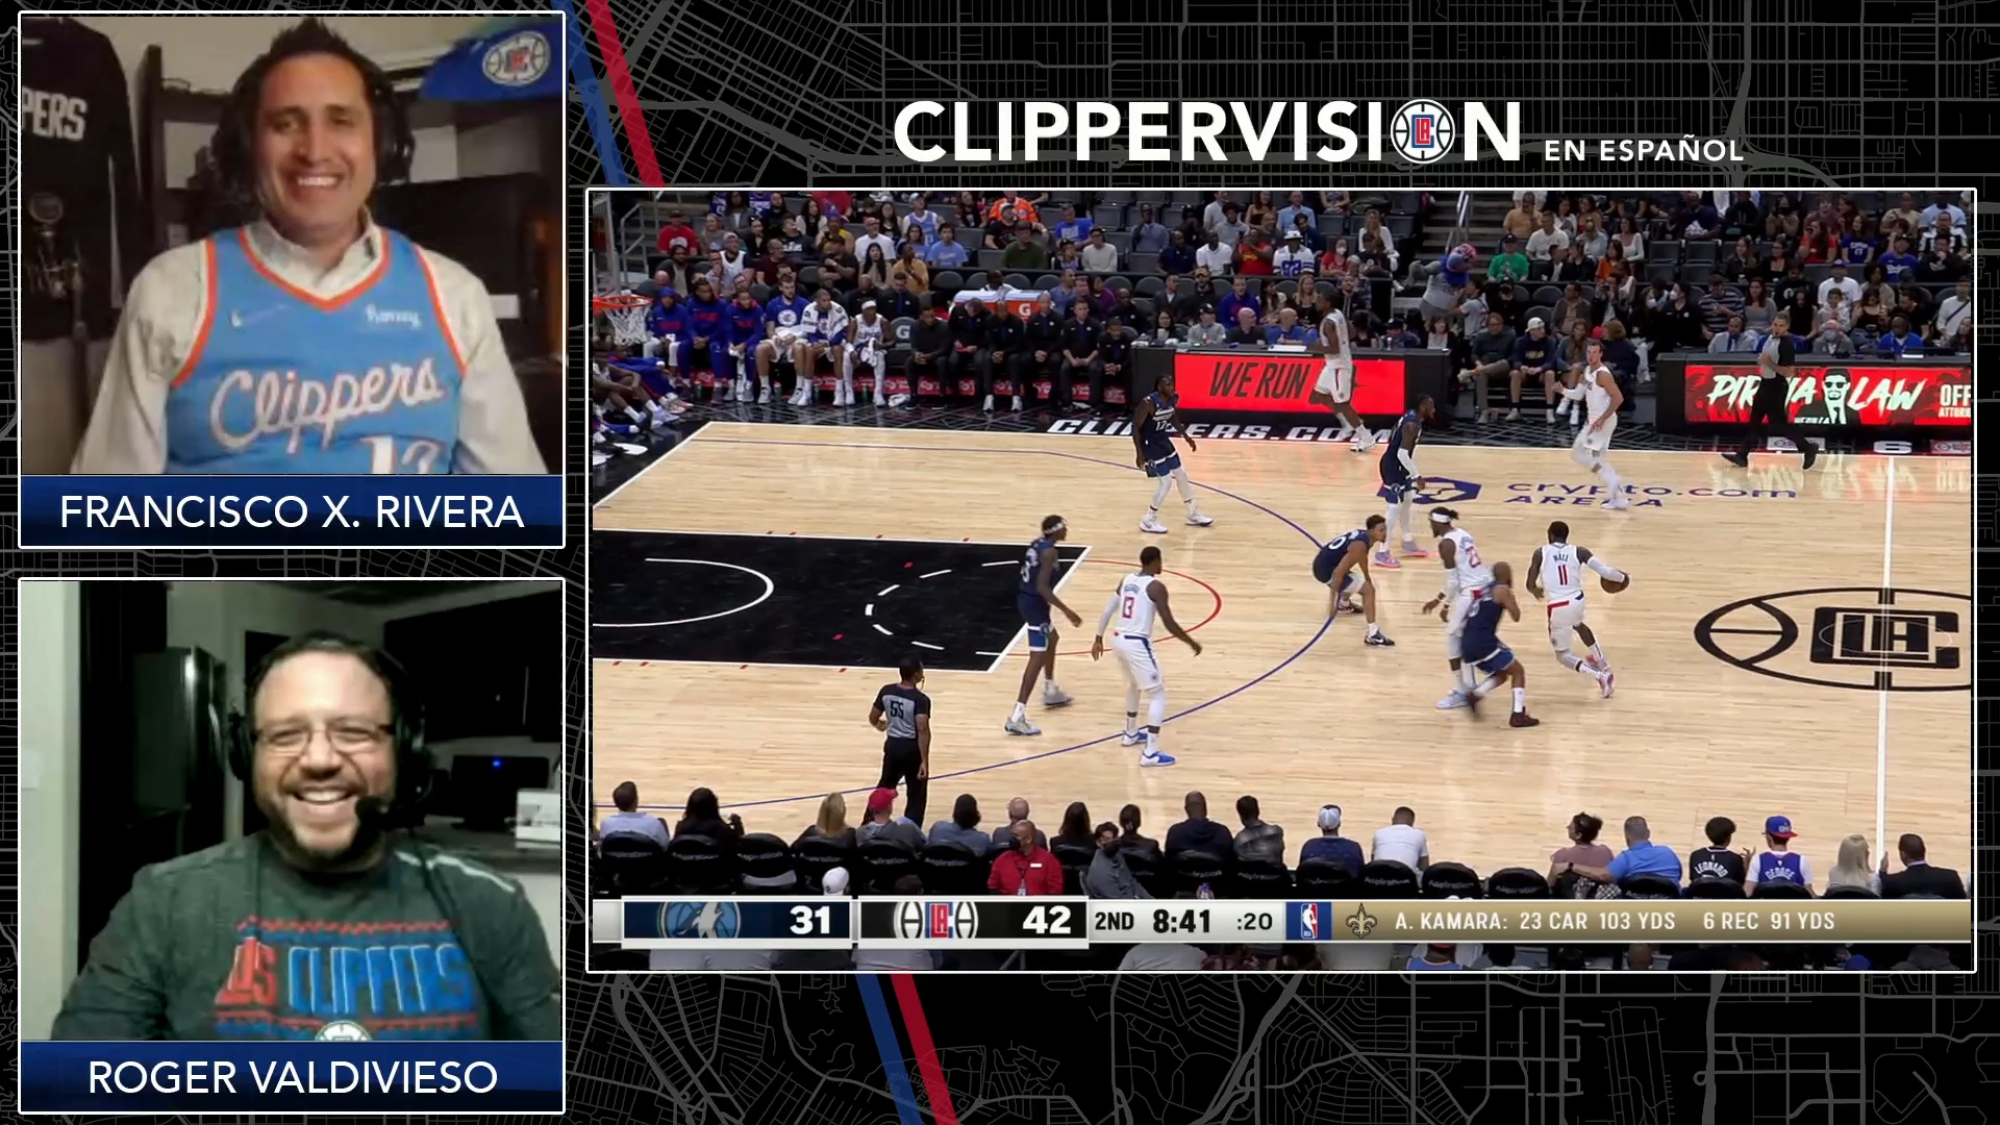 A screenshot of a ClipperVision broadcast in Spanish.